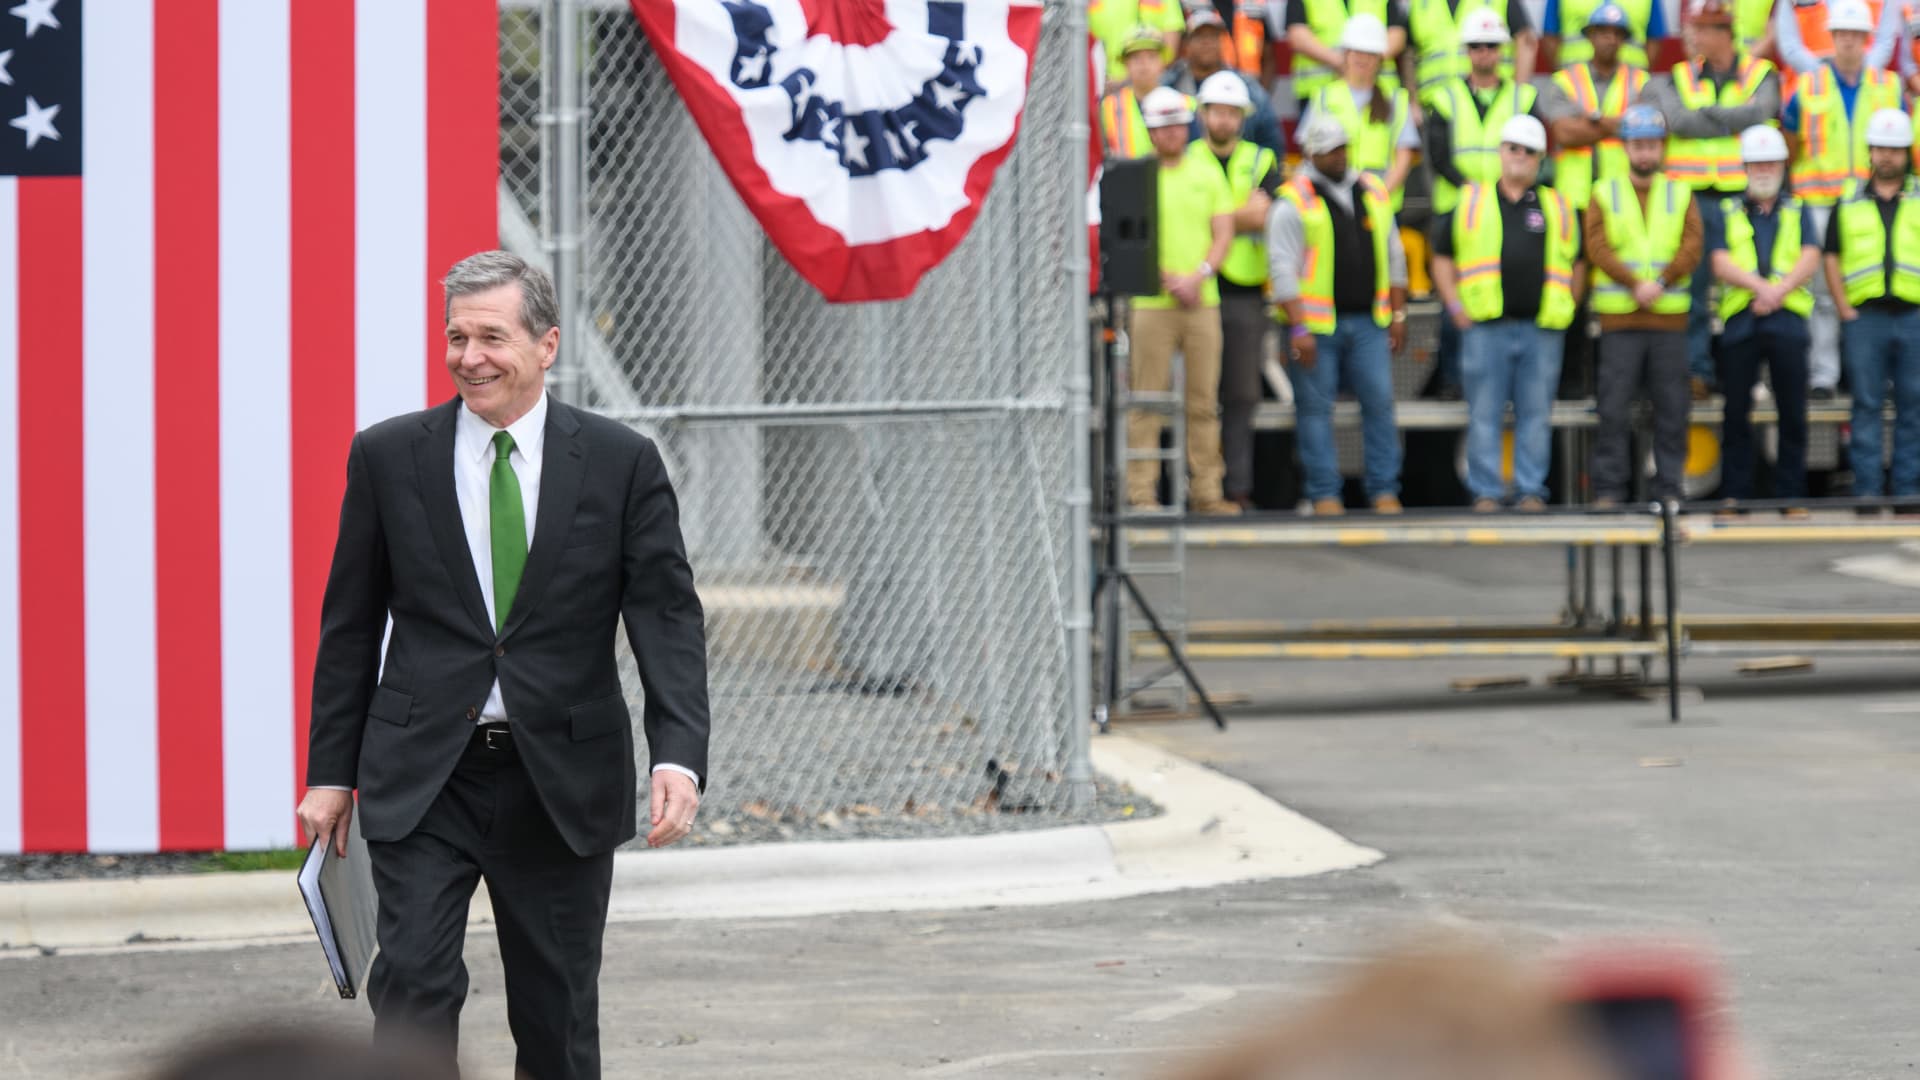 North Carolina Gov. Roy Cooper walks to the podium to address the crowd during President Joe Biden's visit to Wolfspeed, a semiconductor manufacturer, in Durham, North Carolina, March 28, 2023.